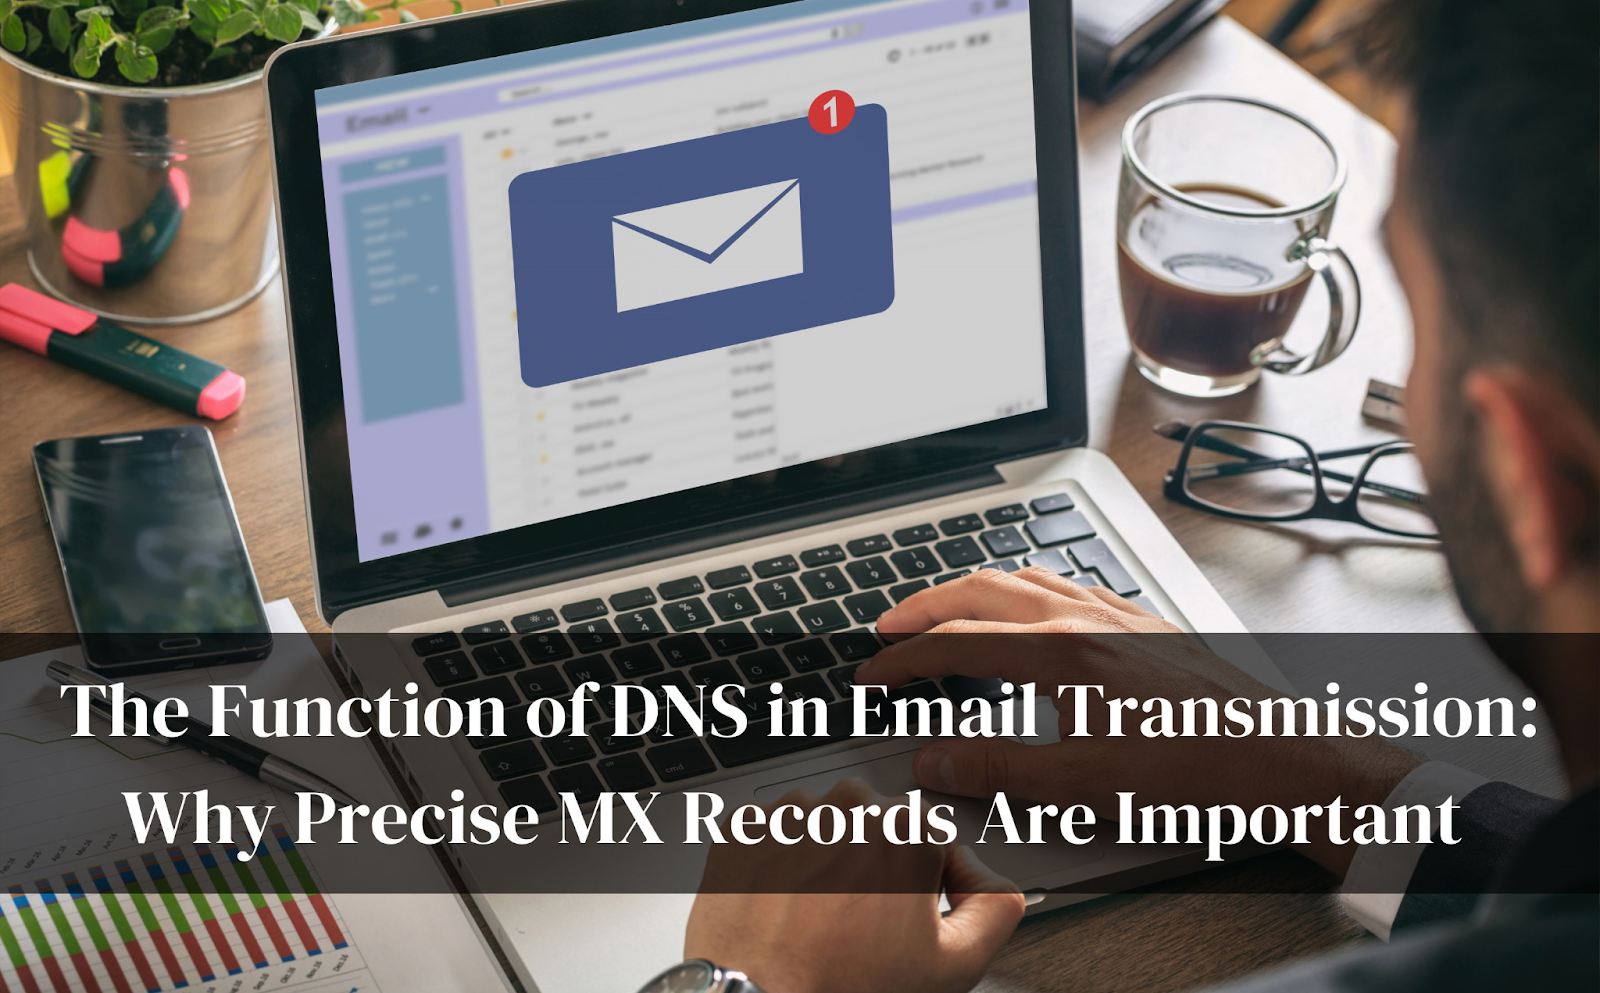 #The Function of DNS in Email Transmission: Why Precise MX Records Are Important 